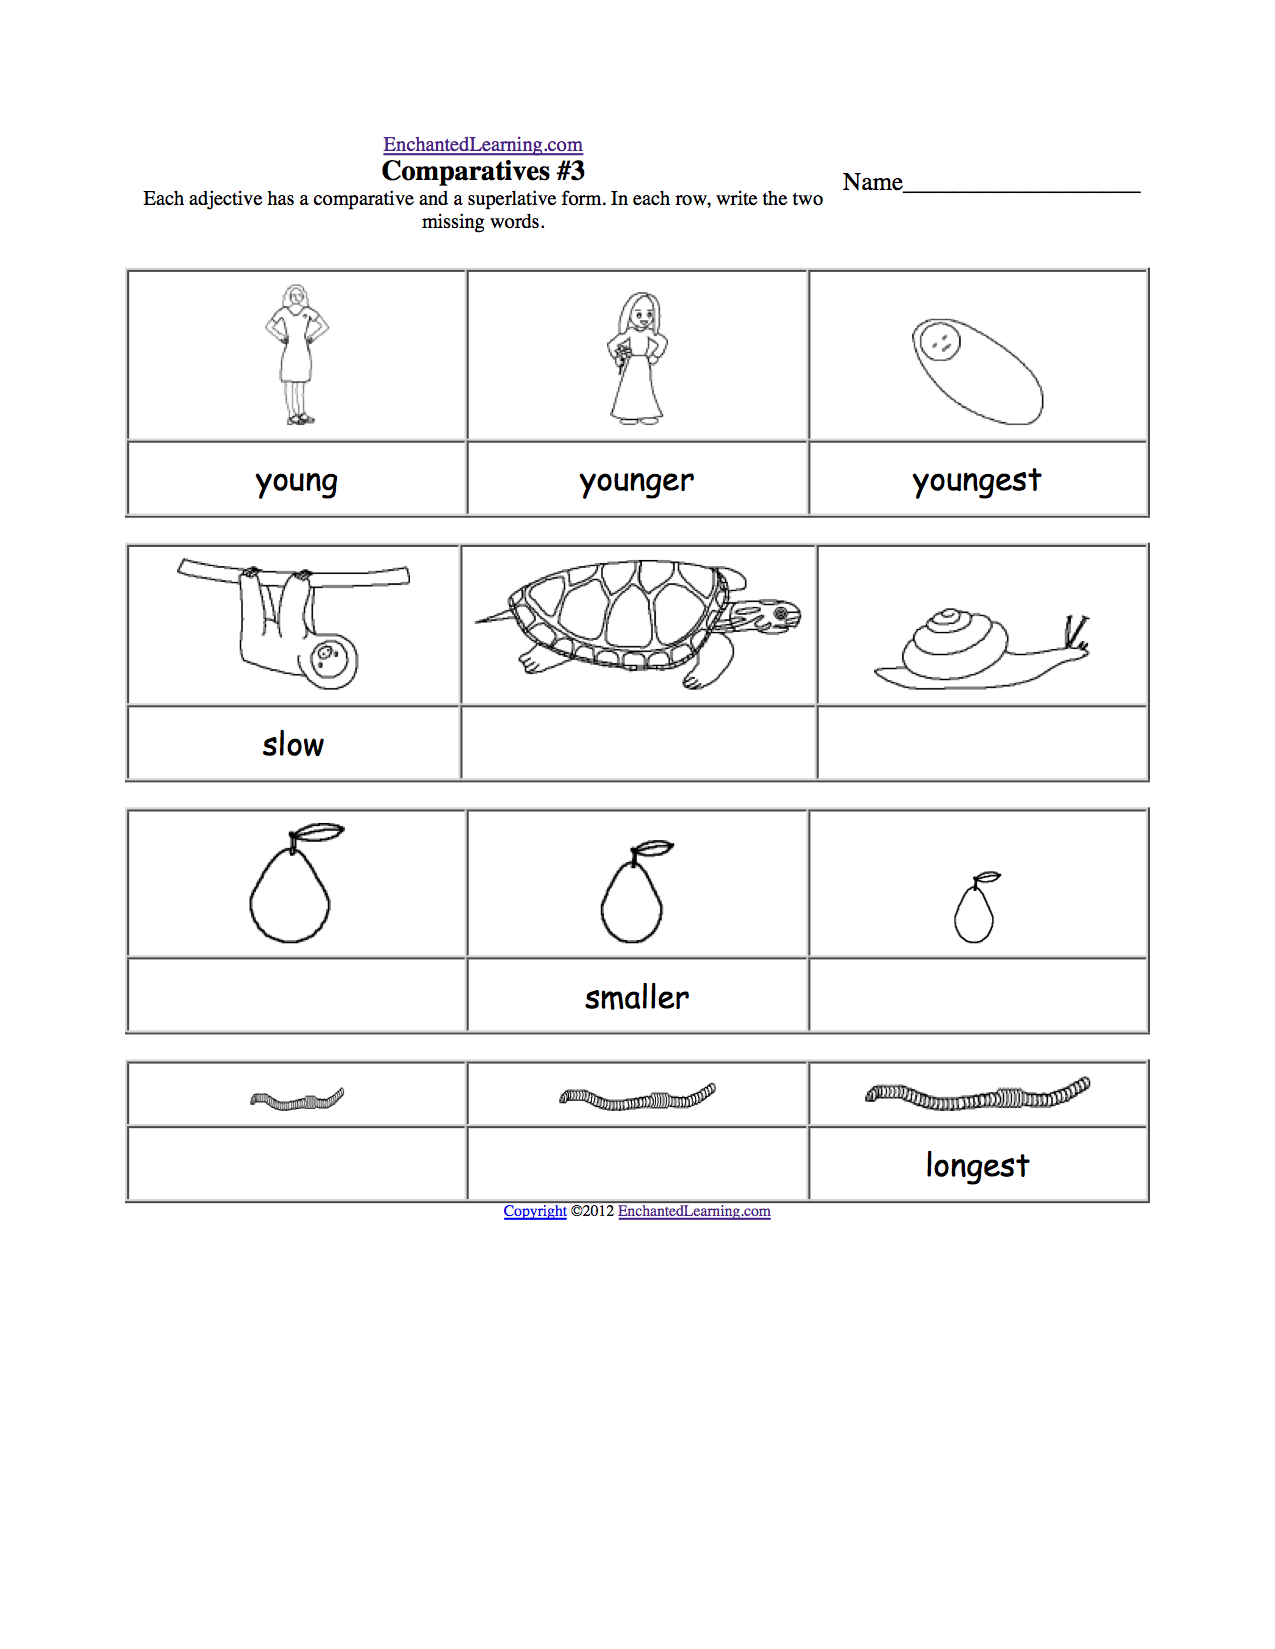 15-best-images-of-adjectives-sentences-worksheet-adjectives-and-adverbs-worksheets